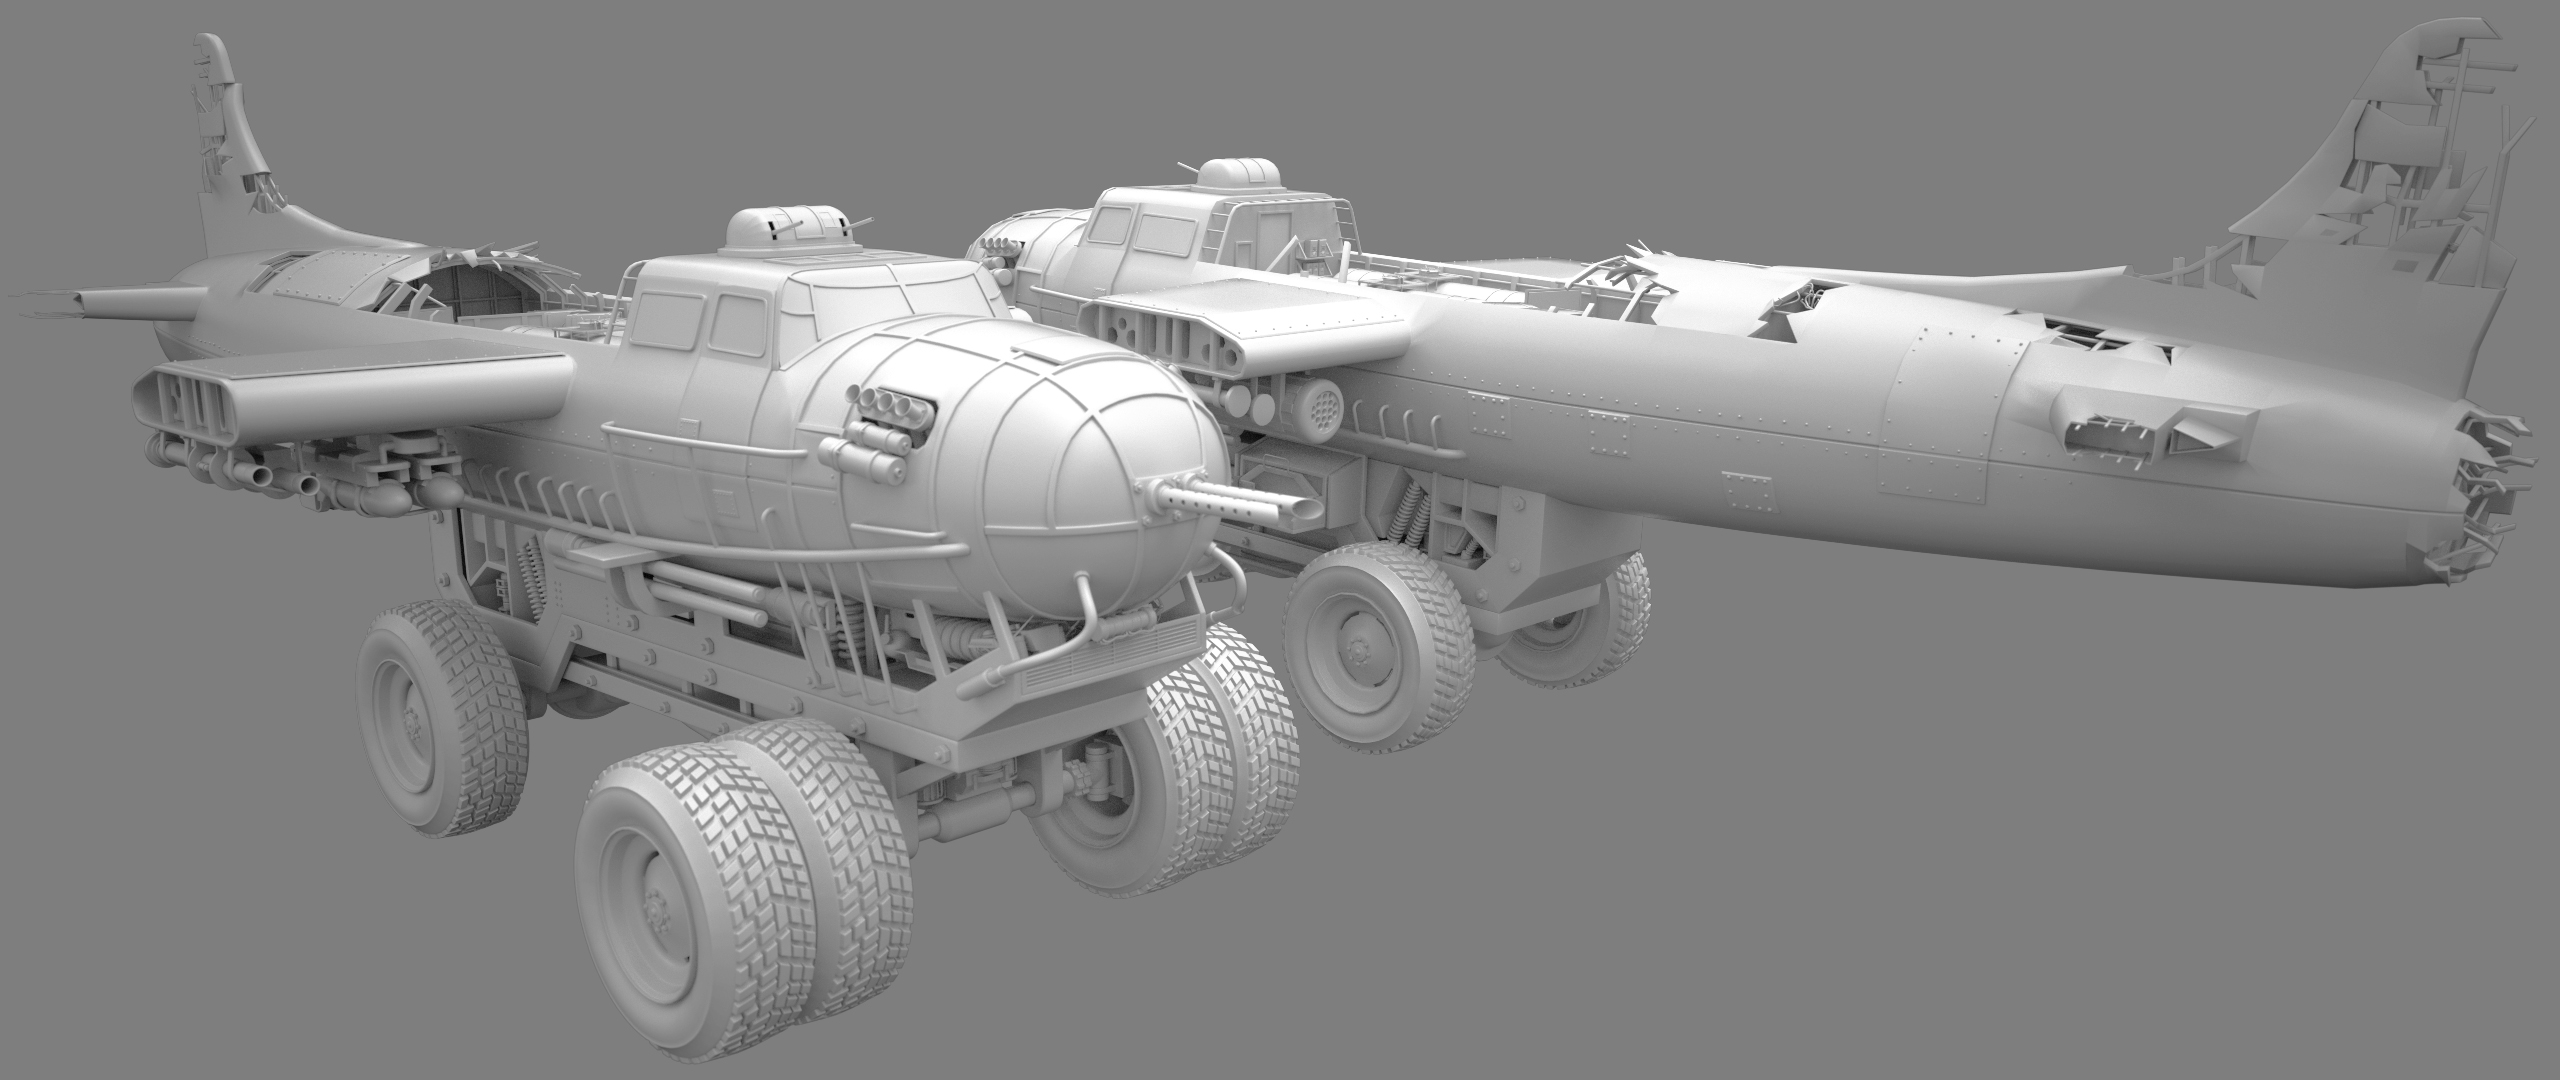 XI Post-apocalyptic Bomber Truck by: Xivon, 3D Models by Daz 3D